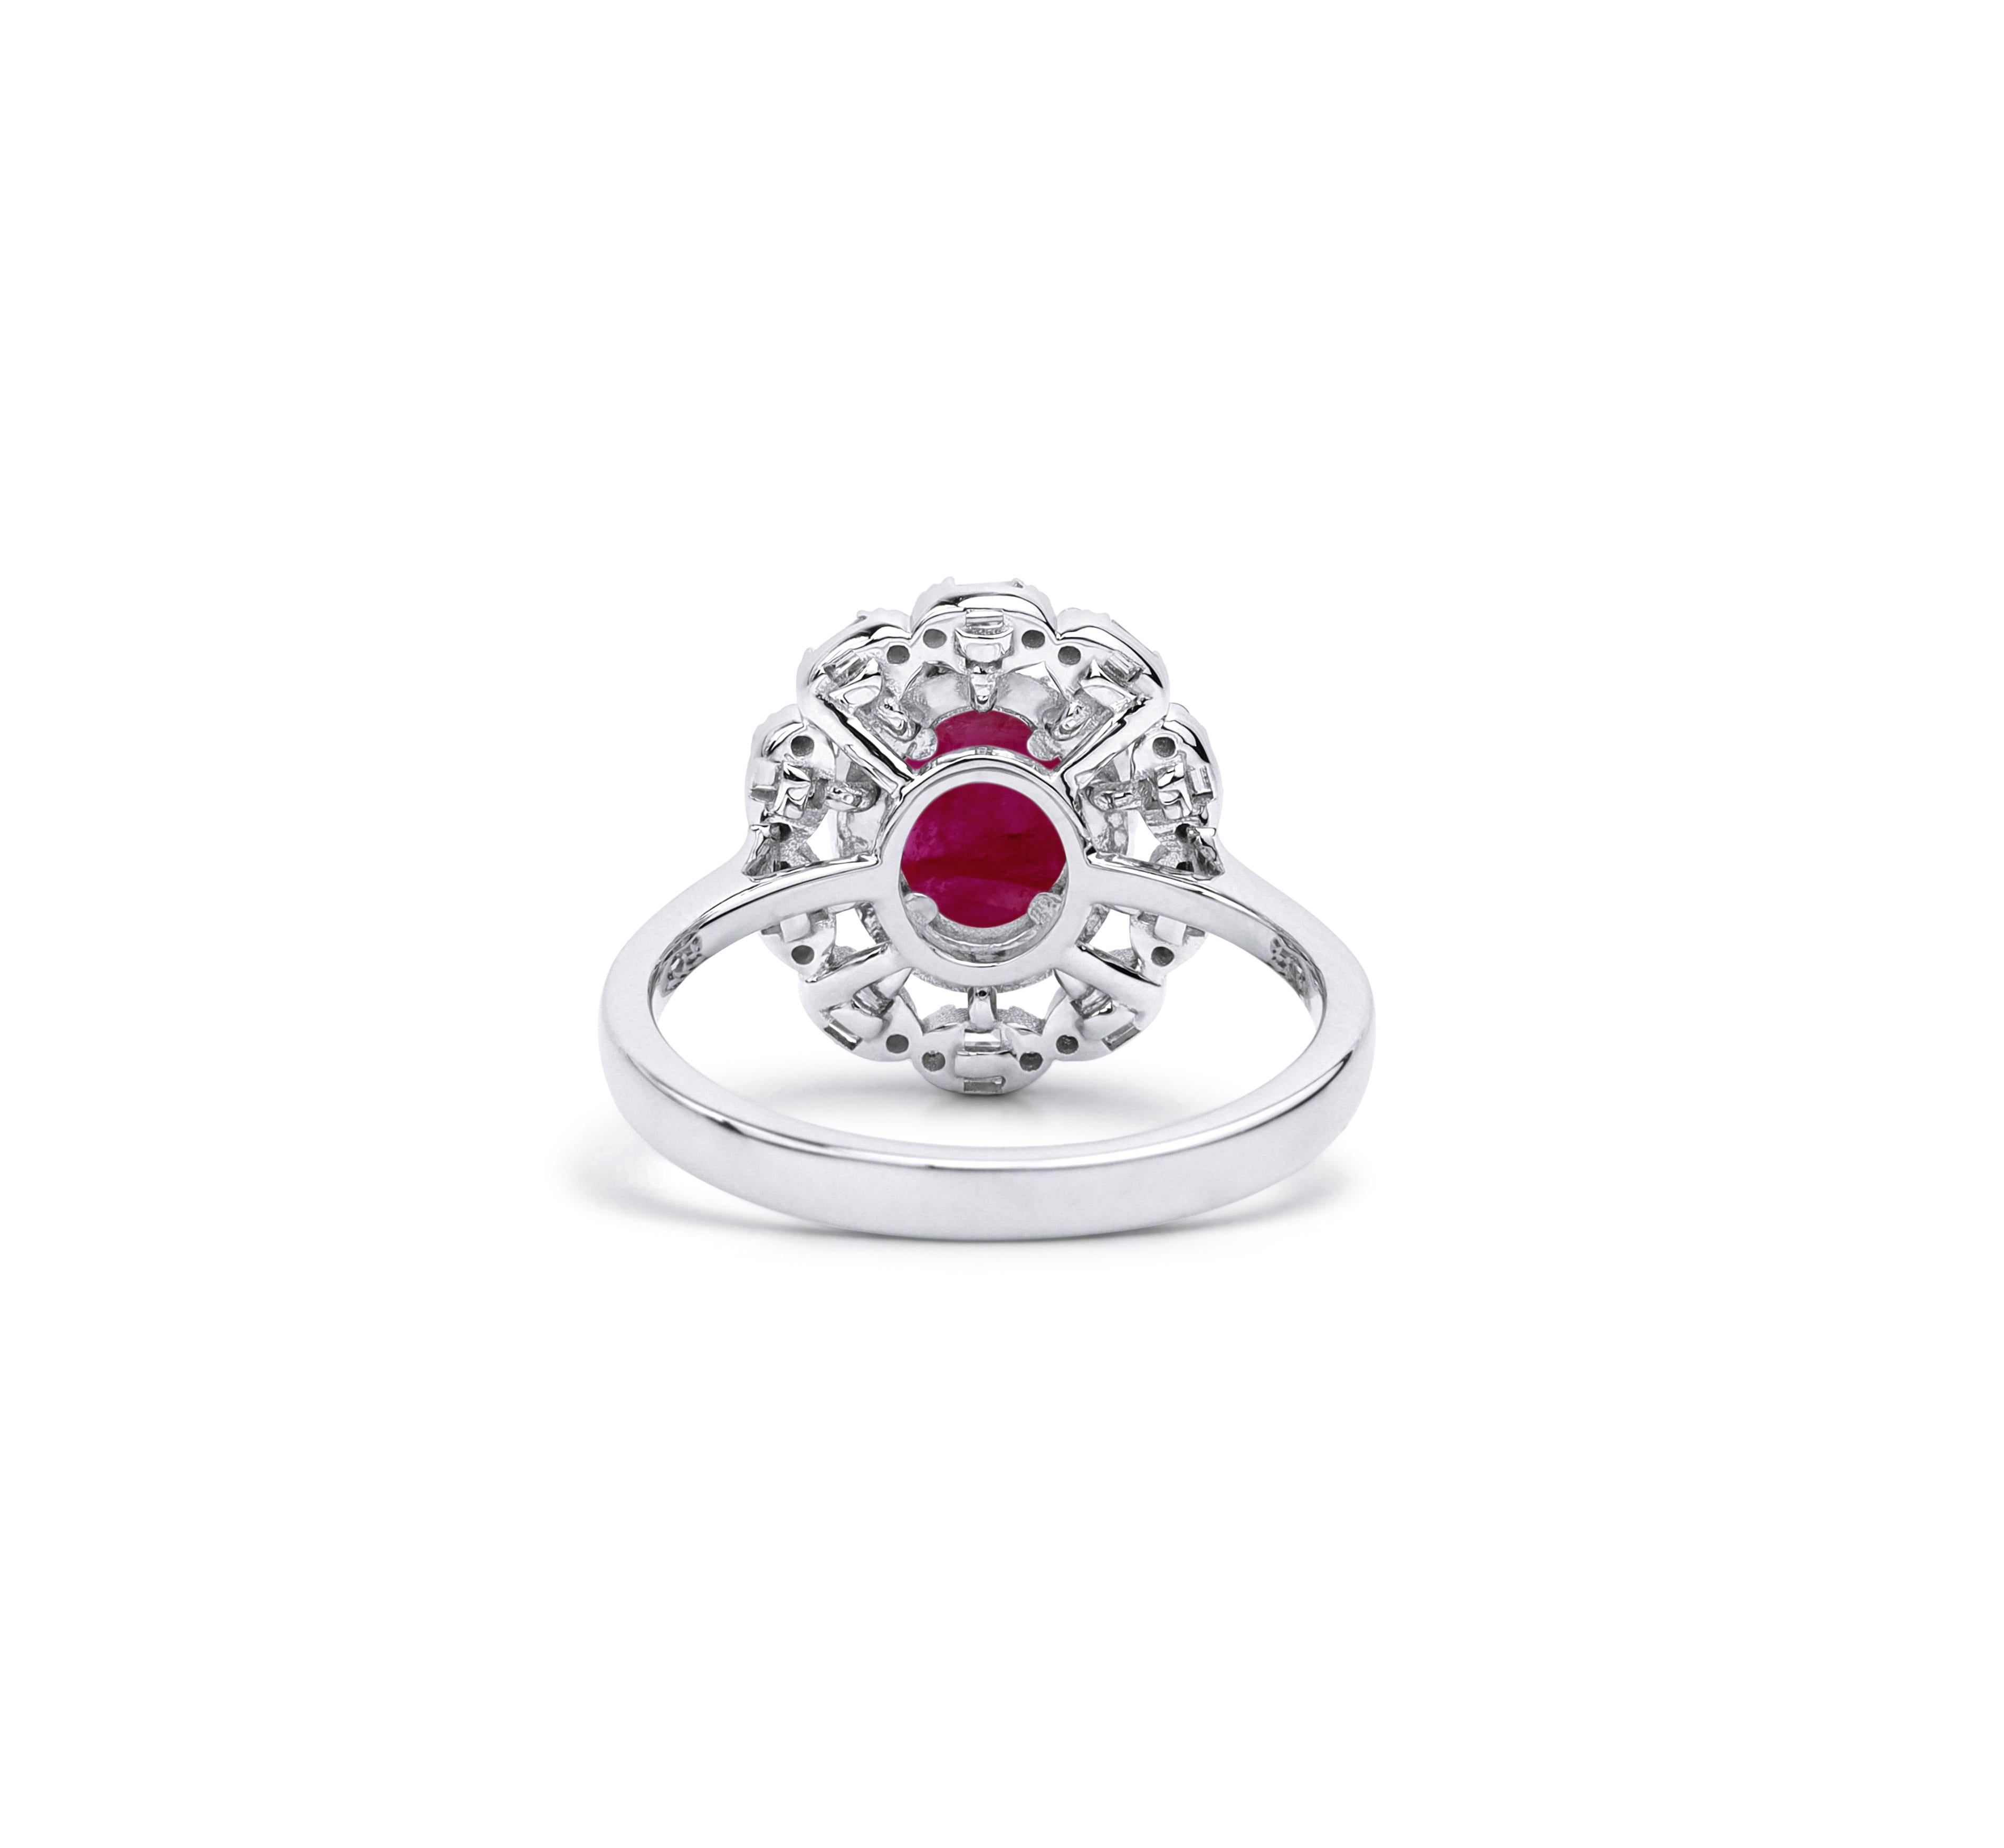 Oval Red Ruby Diamond Halo Cocktail Engagement Ring in 18 karat White Gold In New Condition For Sale In Jaipur, RJ